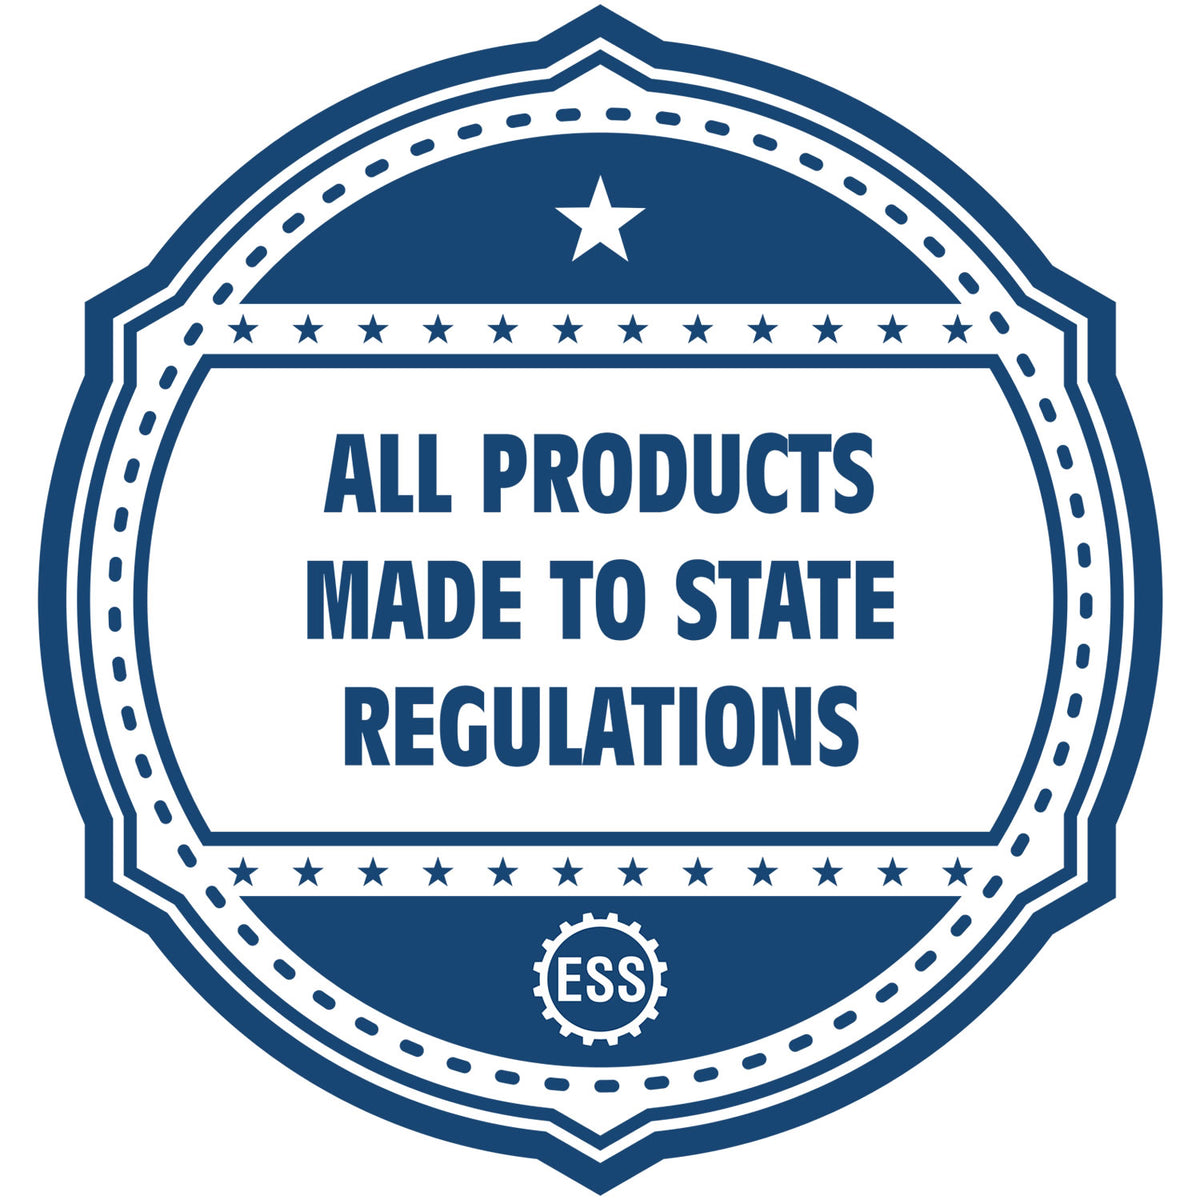 An icon or badge element for the MaxLight Premium Pre-Inked Florida Rectangular Notarial Stamp showing that this product is made in compliance with state regulations.